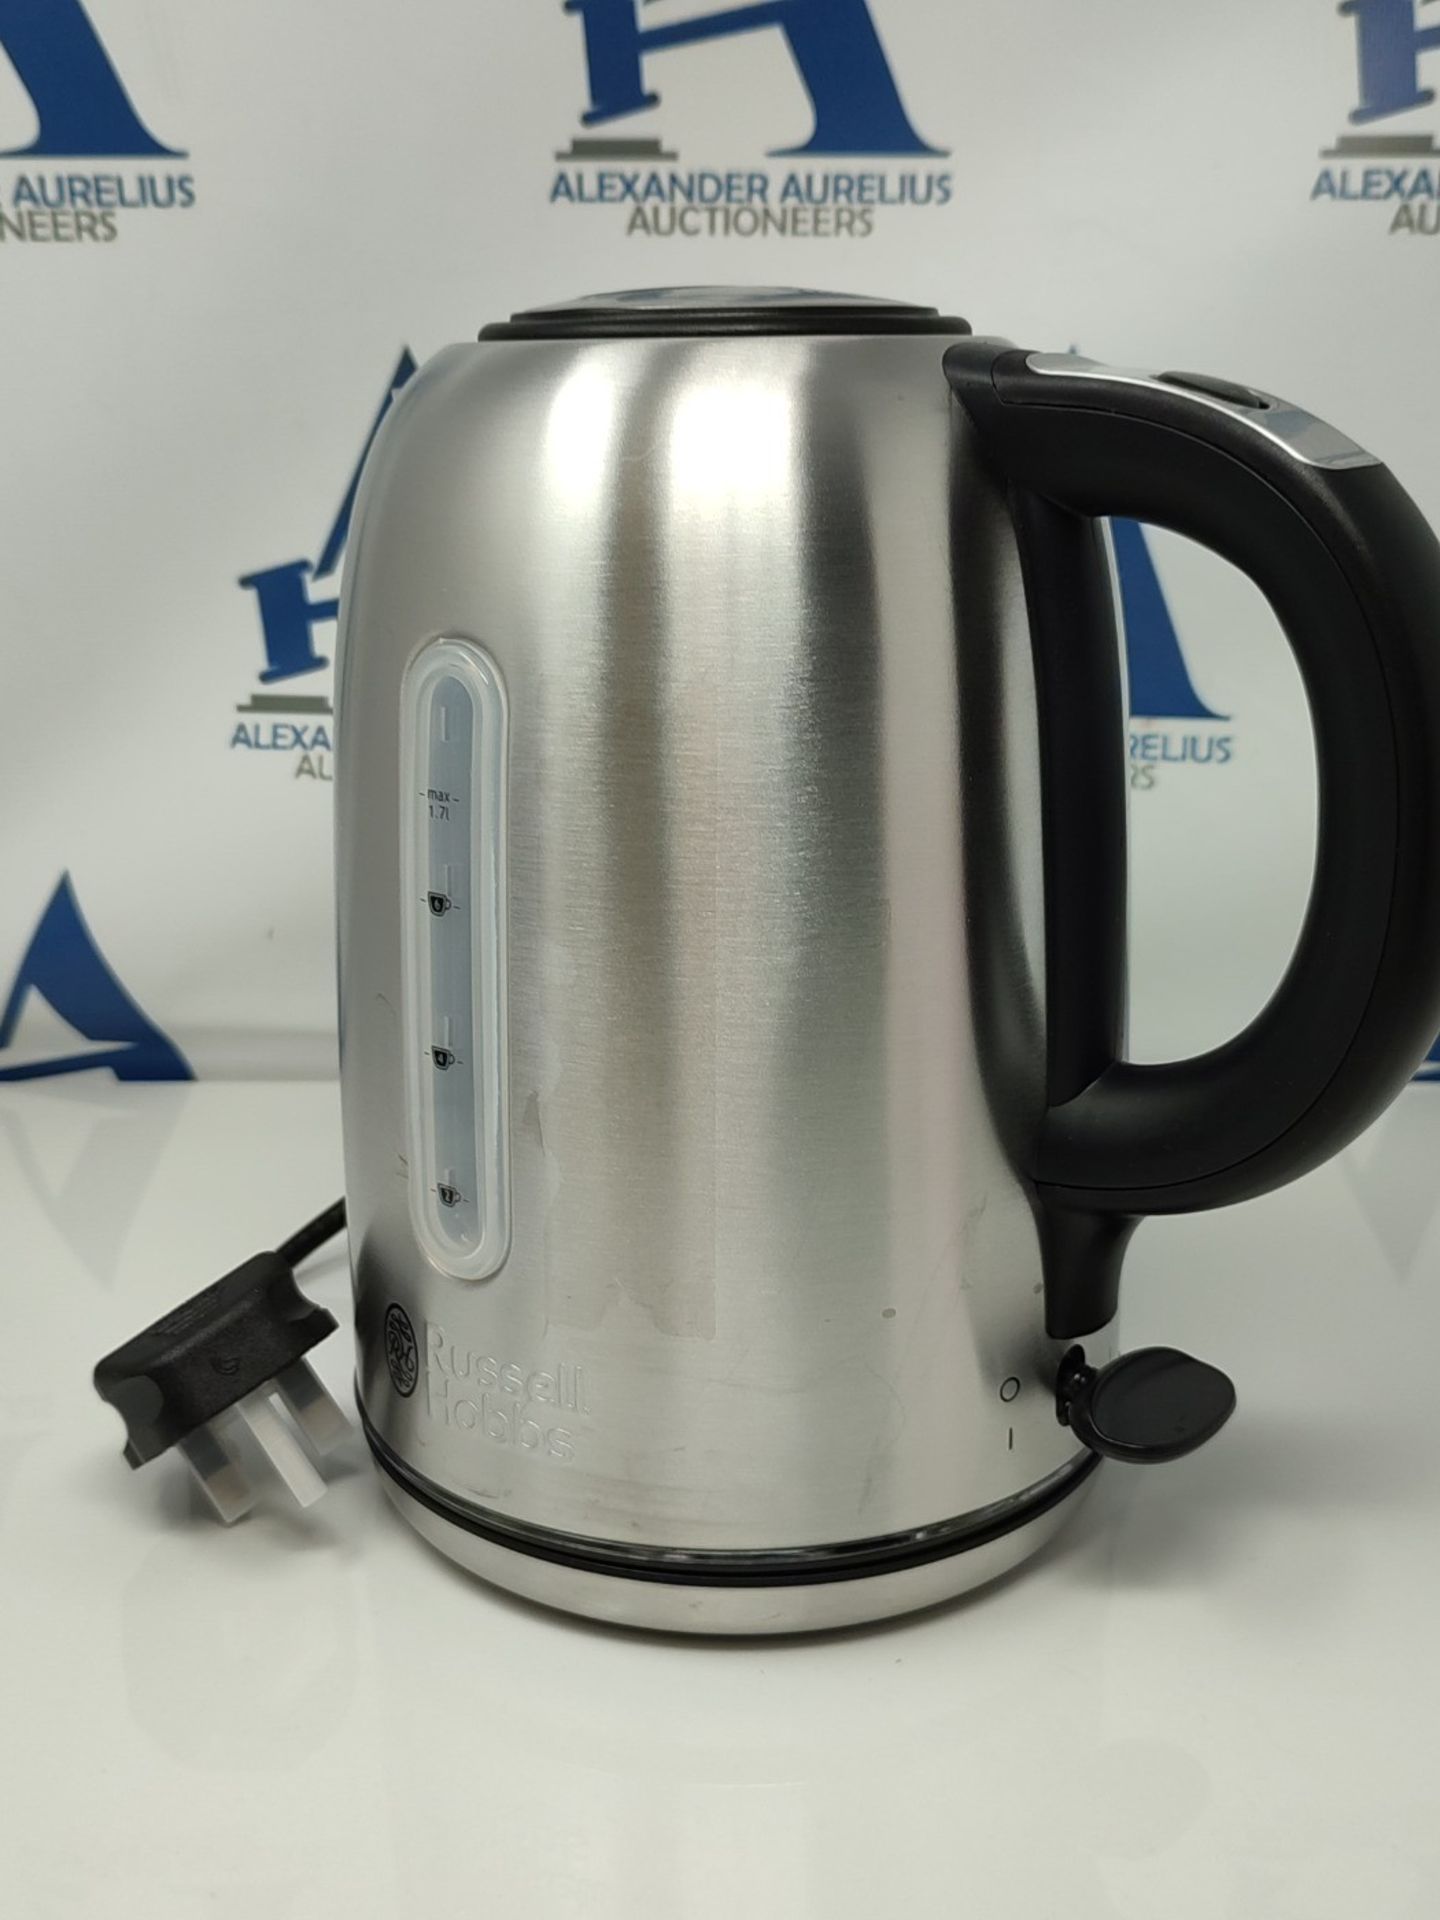 Russell Hobbs 20460 Quiet Boil Kettle, Brushed Stainless Steel, 3000W, 1.7 Litres - Image 2 of 2